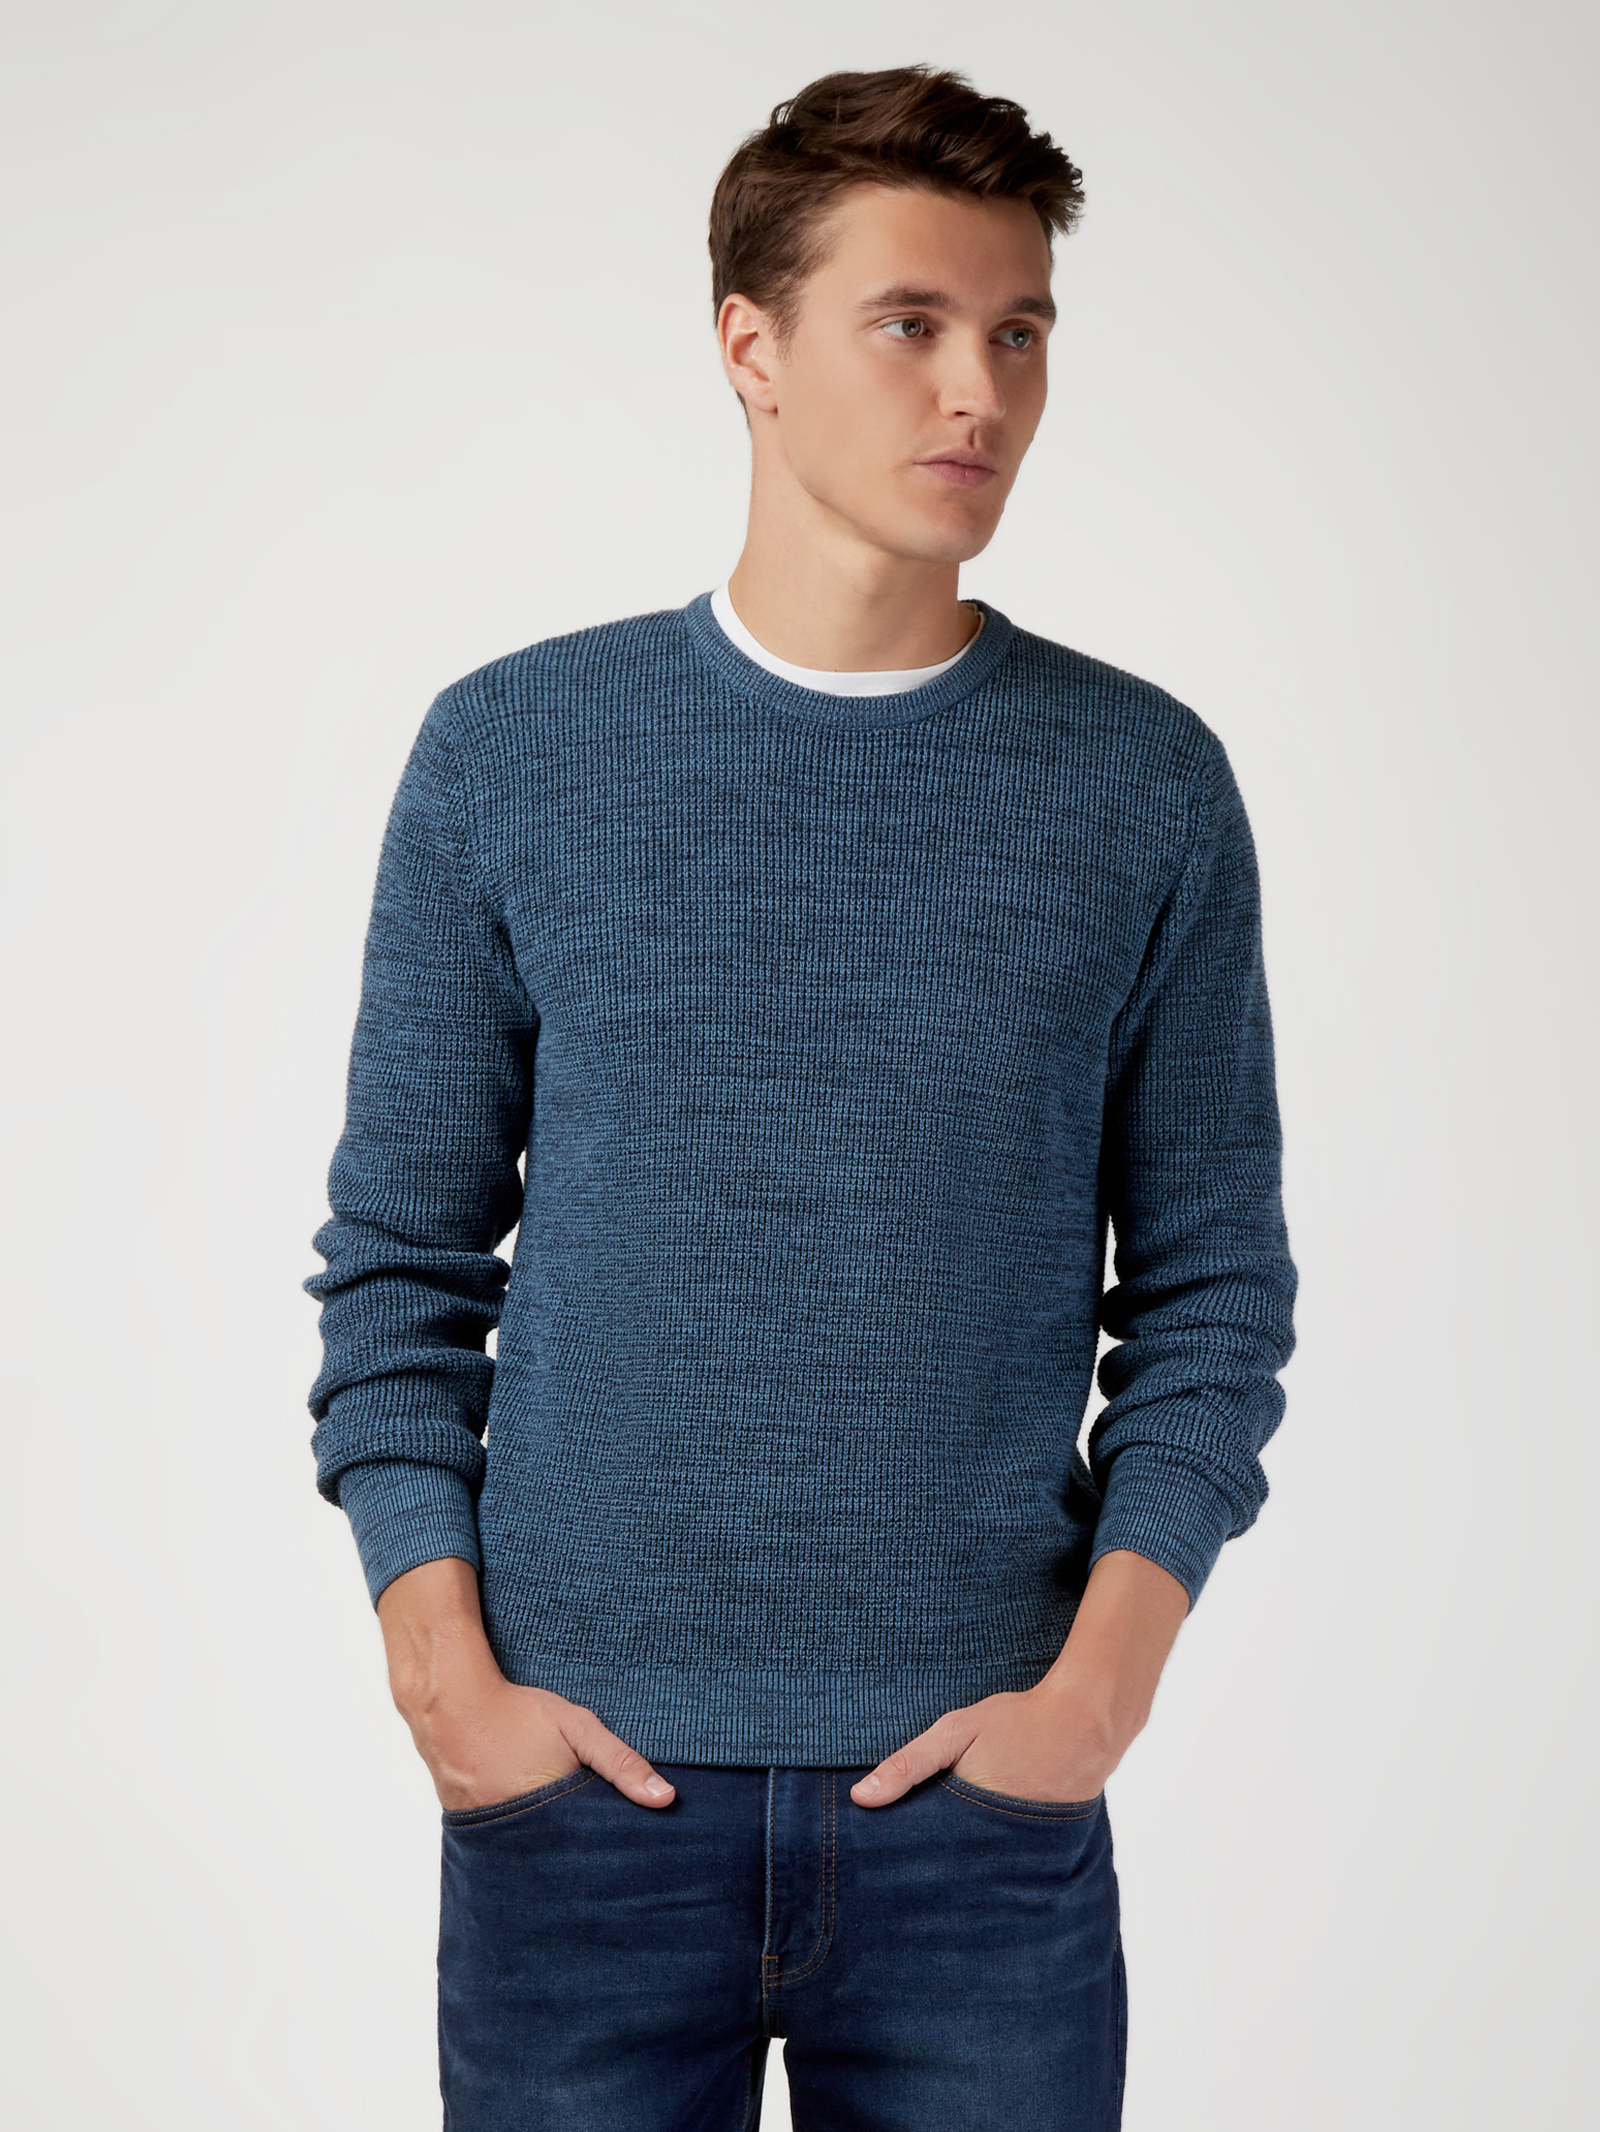 Spencer Textured Crew Knit | Jeanswest